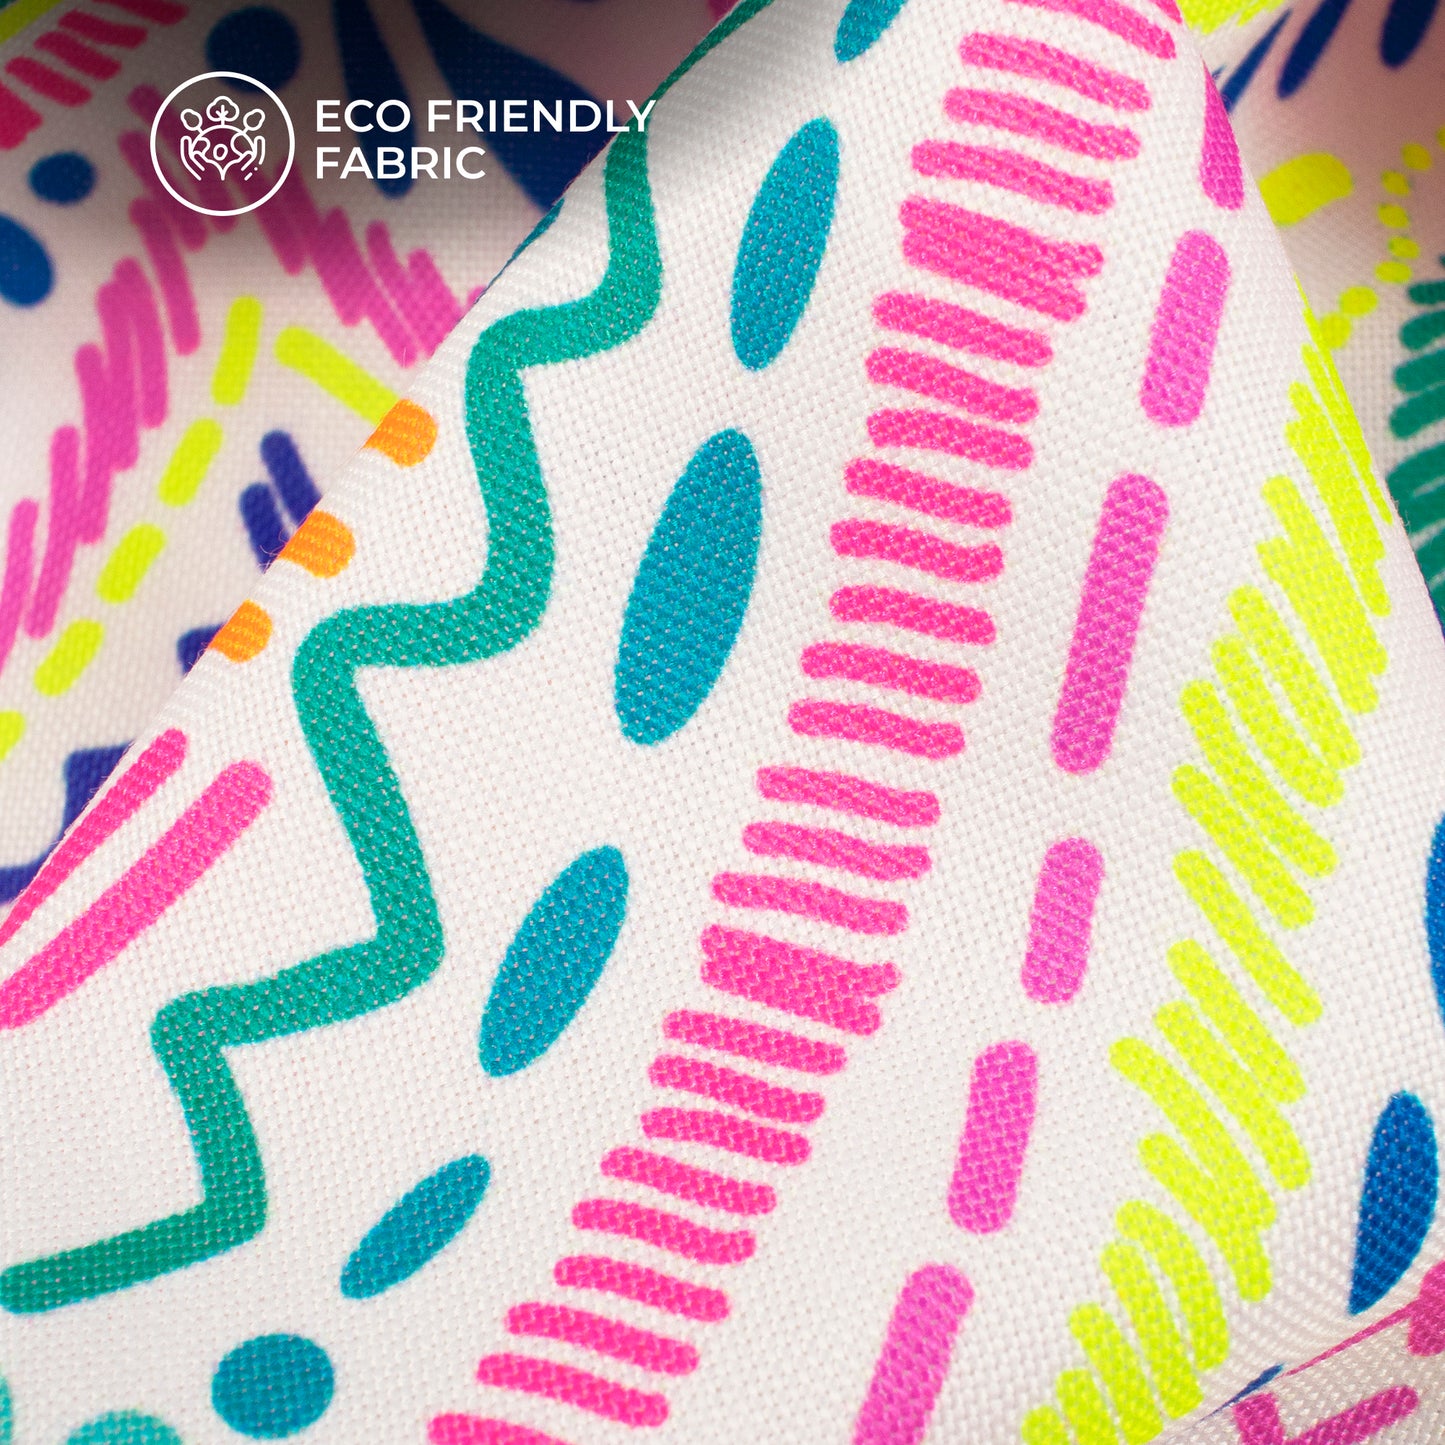 Floral Fusion: Exquisite Neon Digital Print Rayon Fabric